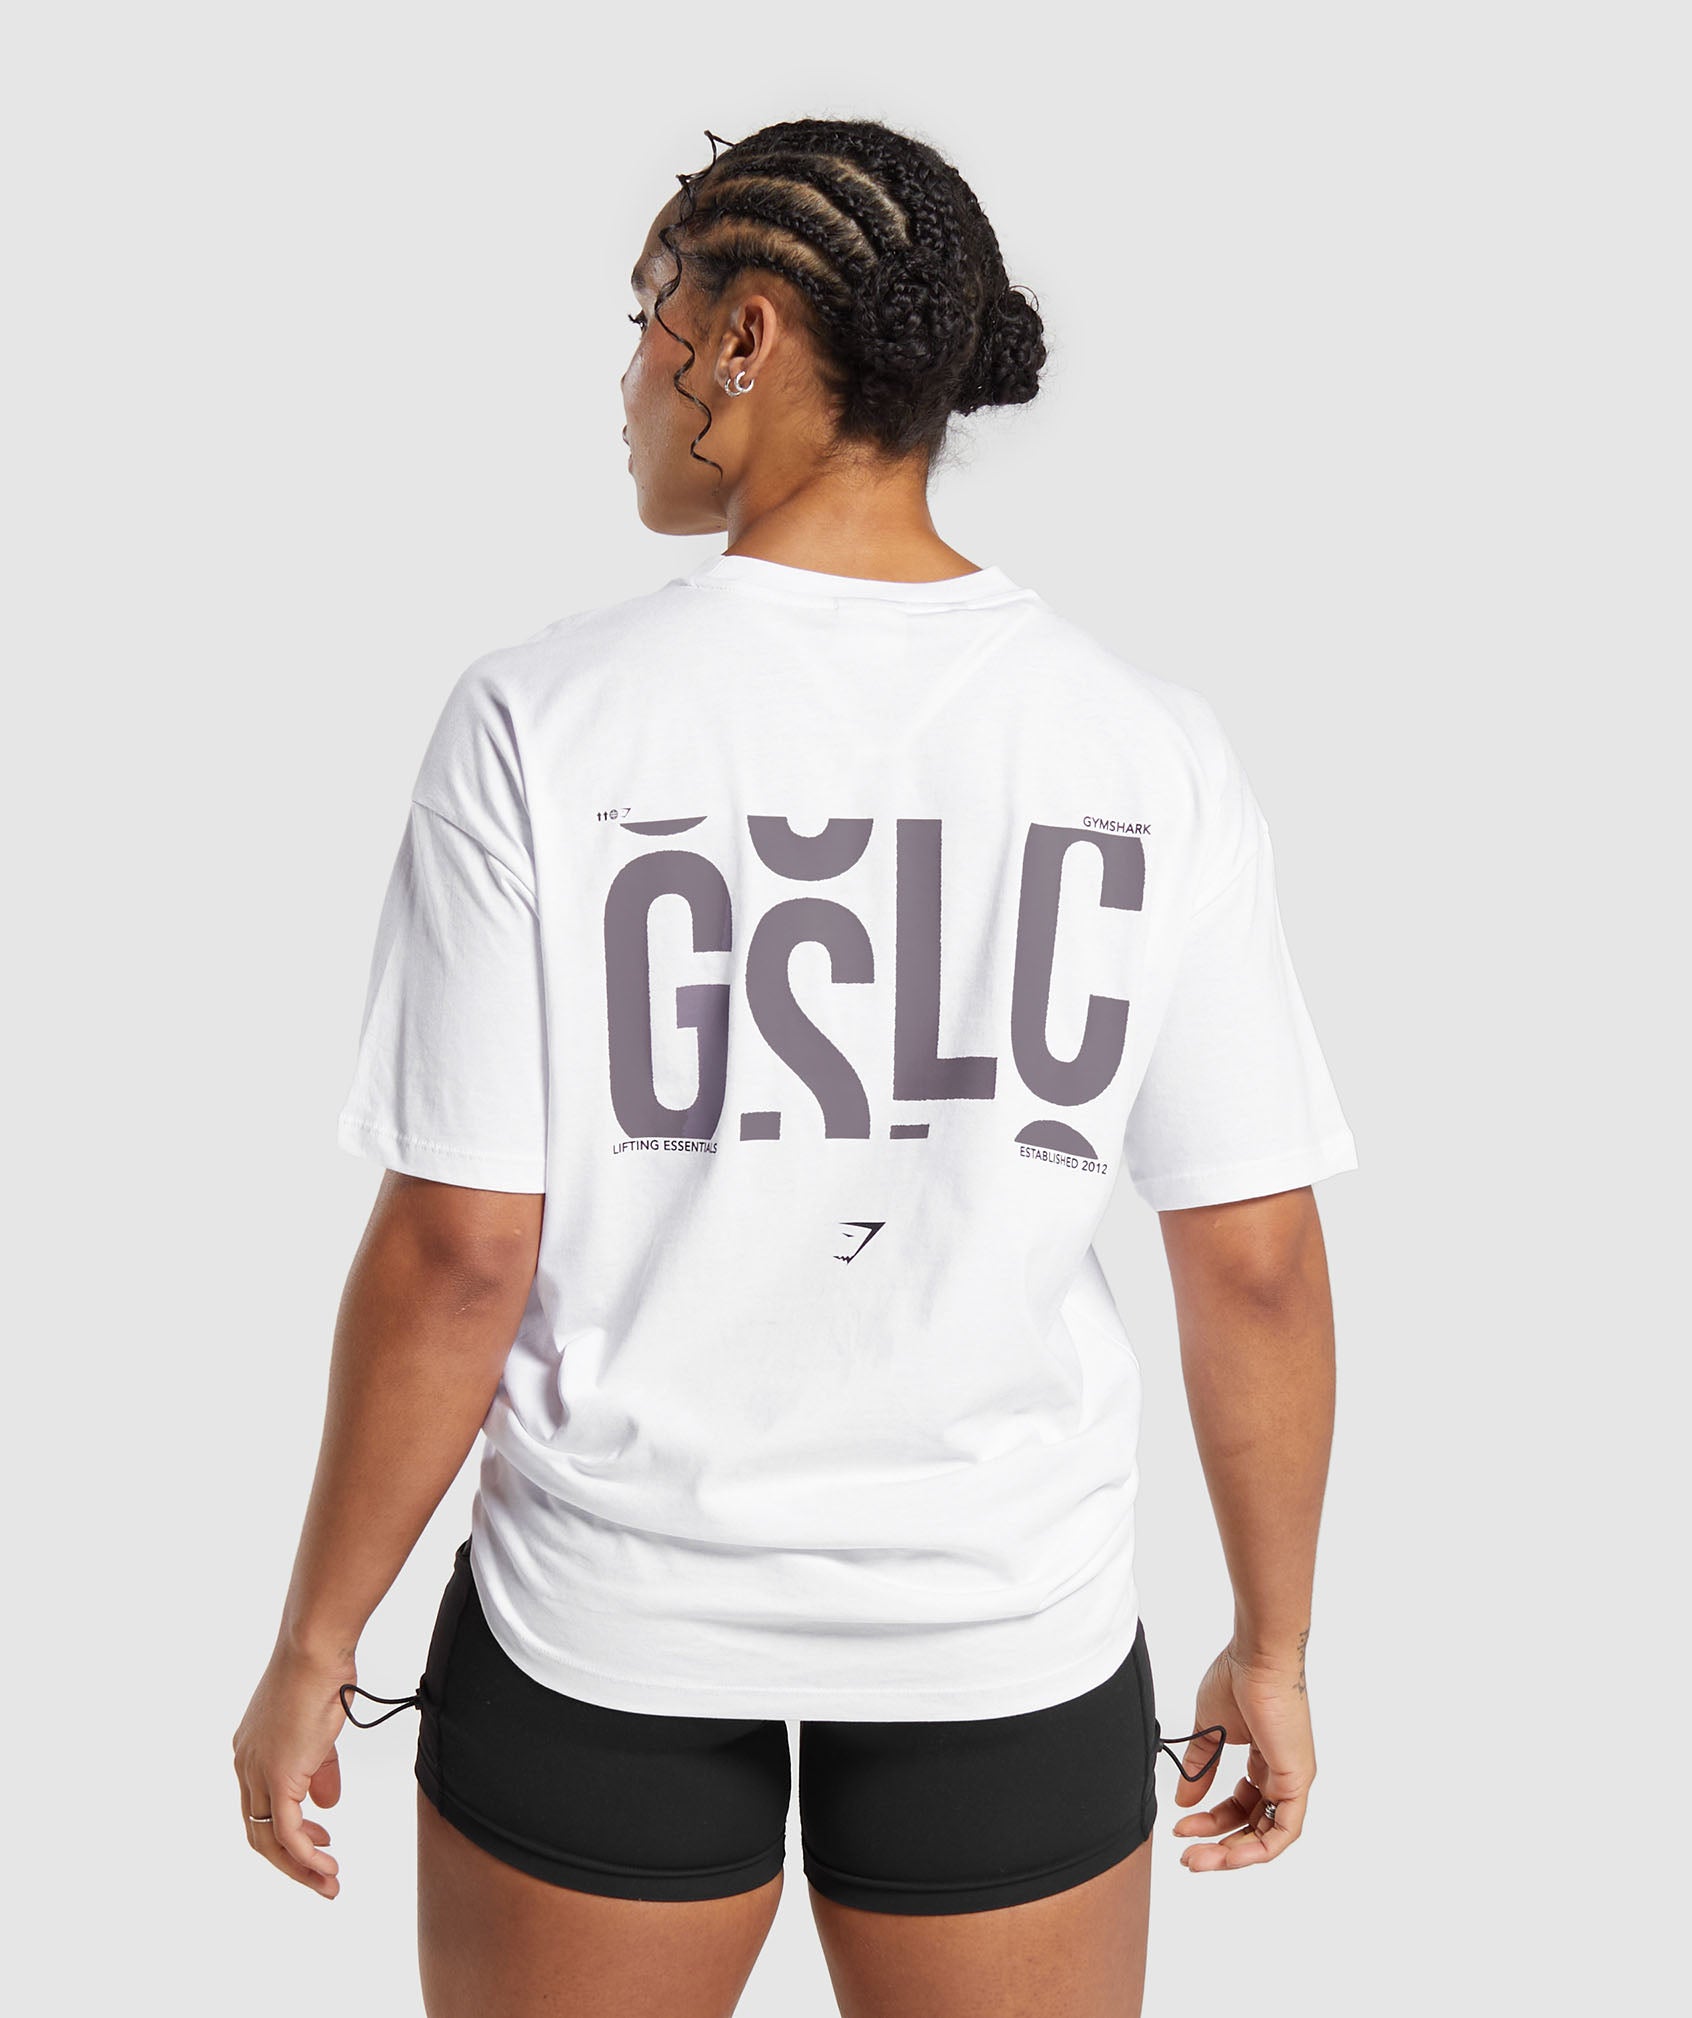 GSLC OS Tee in White